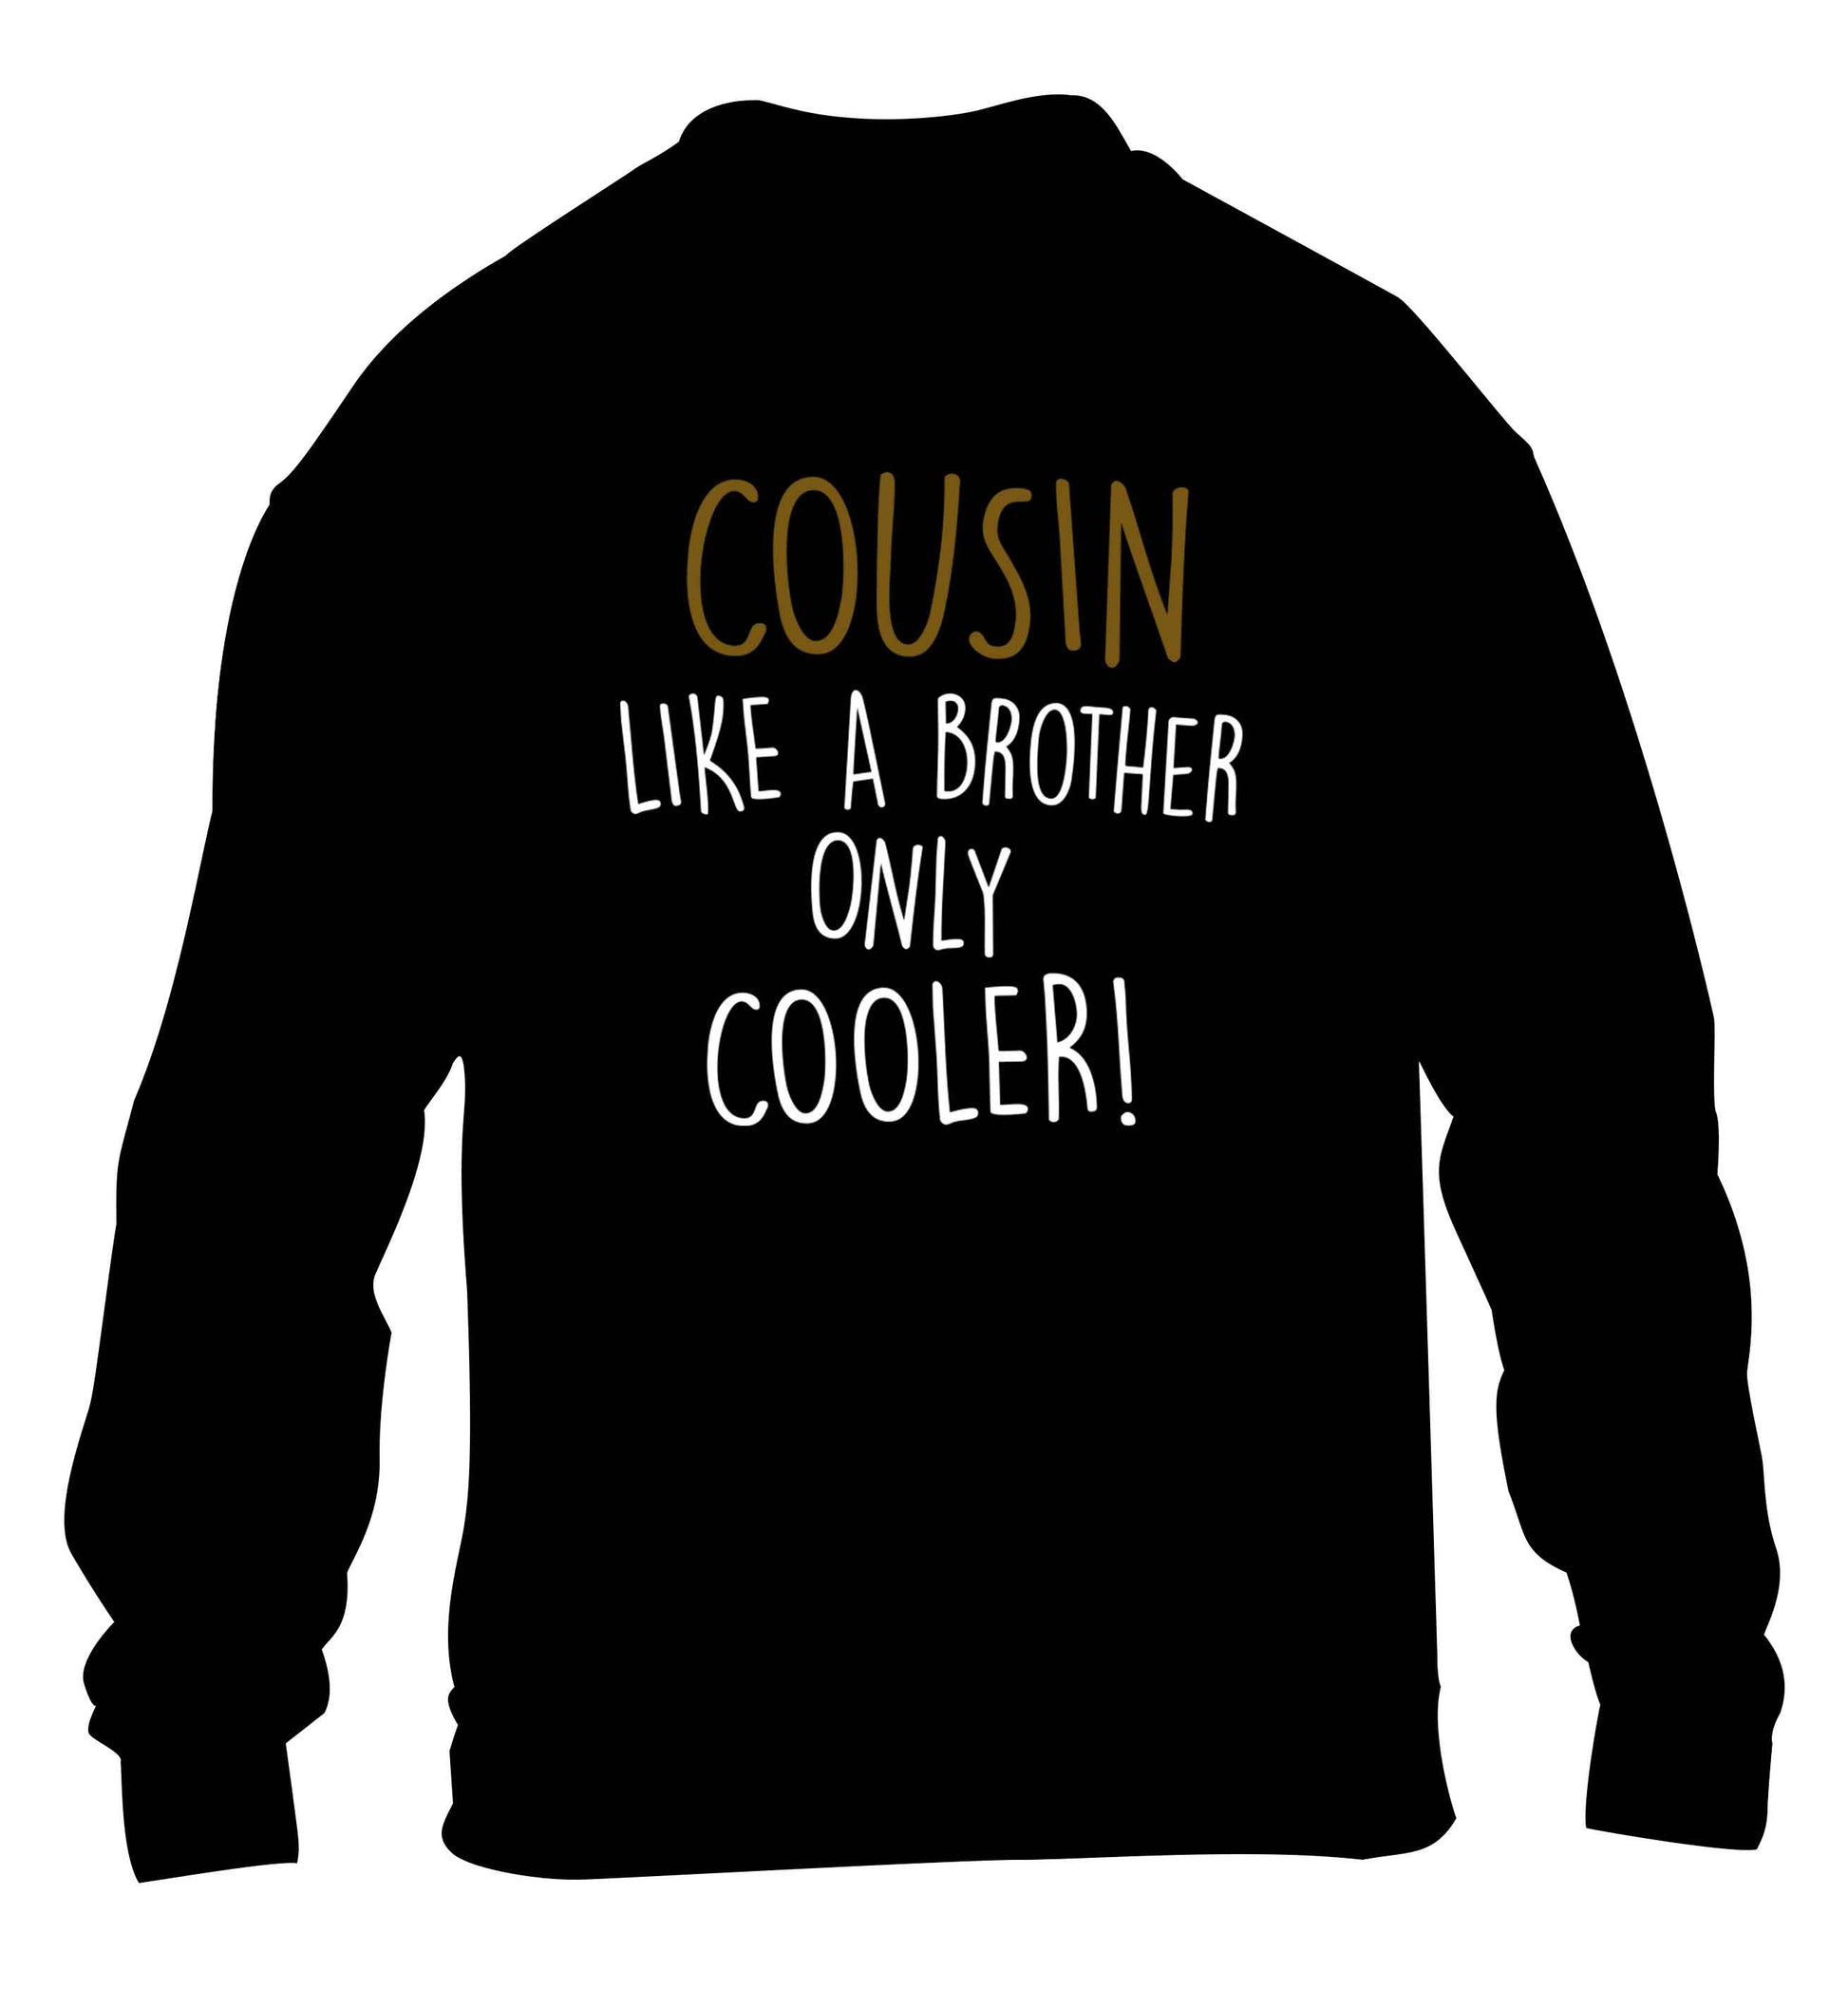 Cousin like a brother only cooler children's black sweater 12-13 Years